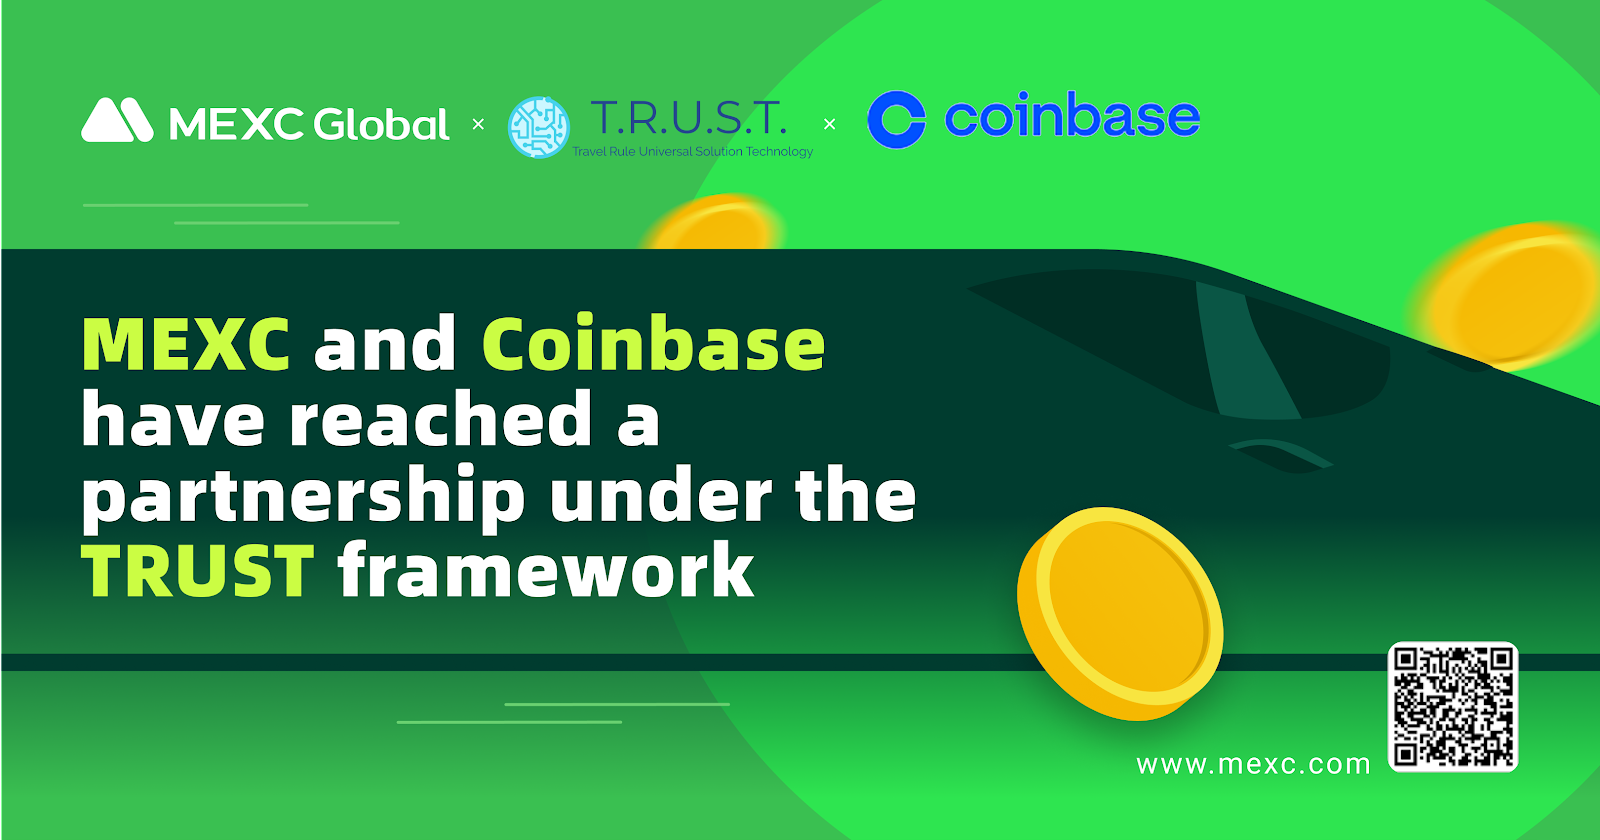 MEXC and Coinbase Reach Partnership to Jointly Fulfil the Privacy and Security Obligations of Cryptocurrency Under the TRUST Framework